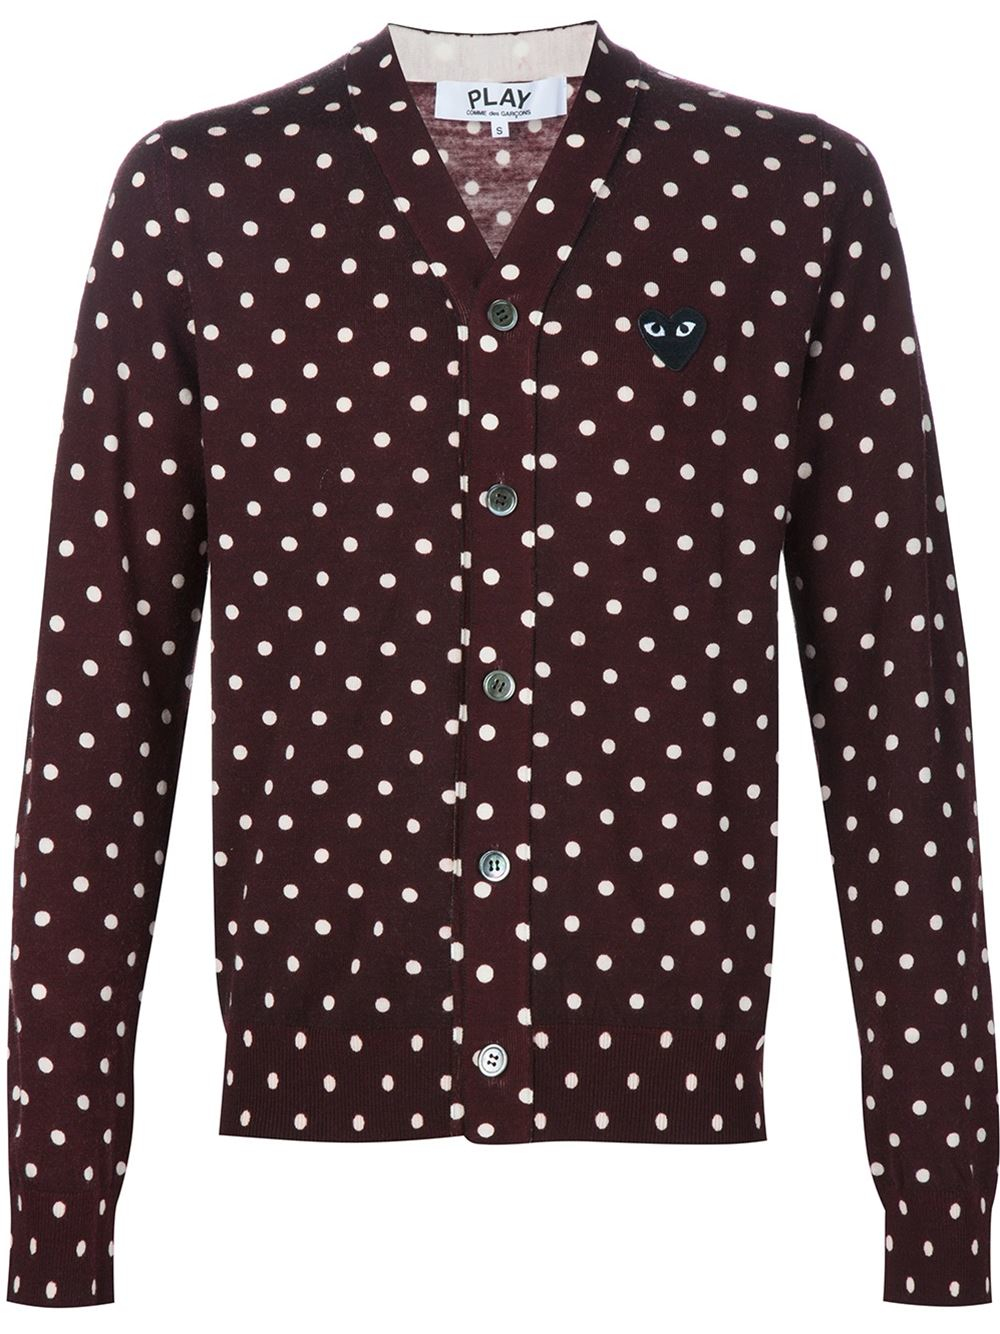 Lyst - Play Comme Des Garçons Embroidered Heart Polka Dot Cardigan in ...